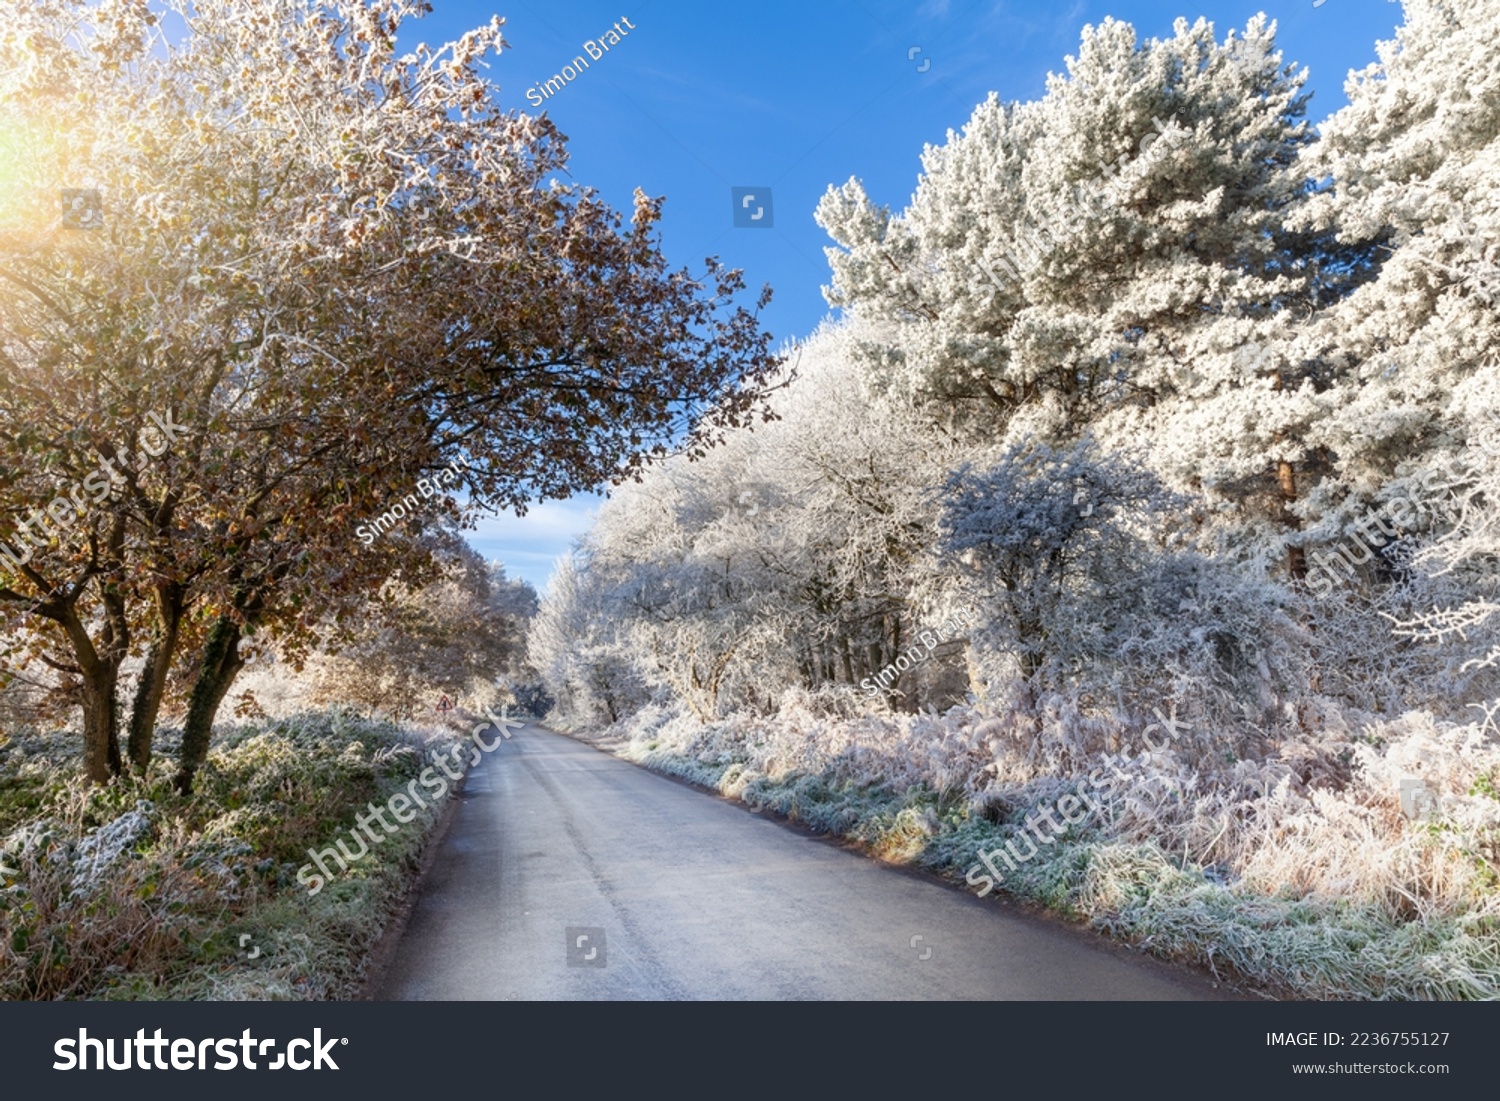 Winter tree frost on UK rural roads. Icy weather with clear blue skies in December #2236755127